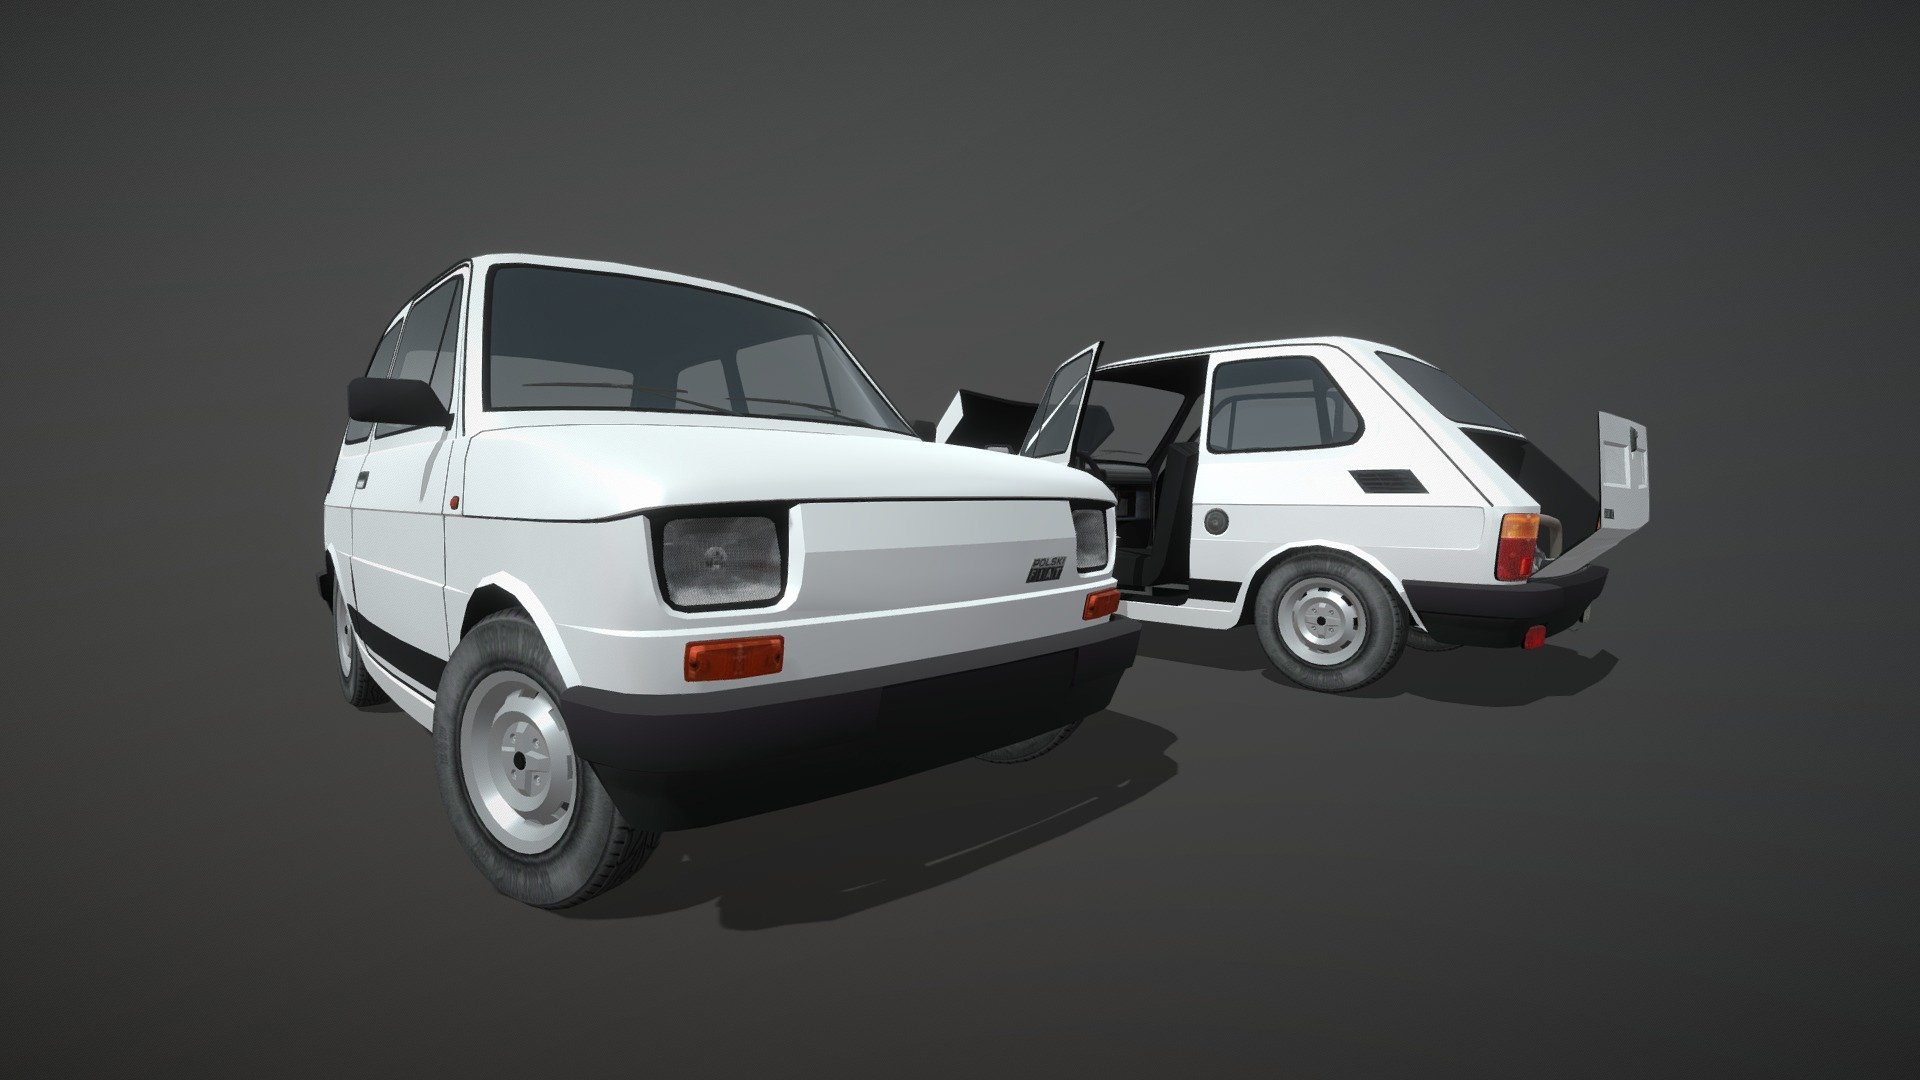 The Polski Fiat 126p i made from scratch using blueprints and images for NFS ProStreet Pepega Edition.

It was one of the two cars that got me into the nfs modding scene and the Pepega Team.

Of course its not perfect, the model had some major changes over time and of course there was some scrapped content.

I tried my best in doing it as accurate as possible and im very happy with the final result.

And of course you car drive it and upgrade it in the mod!

I really recomment playing the mod because my friends put a lot of effort into it and they deserve it.

You can get the mod here:

https://pepegamod.com/pepega-download/

Special Thanks for:

-Pepega Team for giving me a chance and of course for being the best dudes i ever met,

-Marf, Ekskalibur12, Wojach and my other great friends for their support,

-And of course You for playing the mod and enjoying the work me and my friends did 3d model